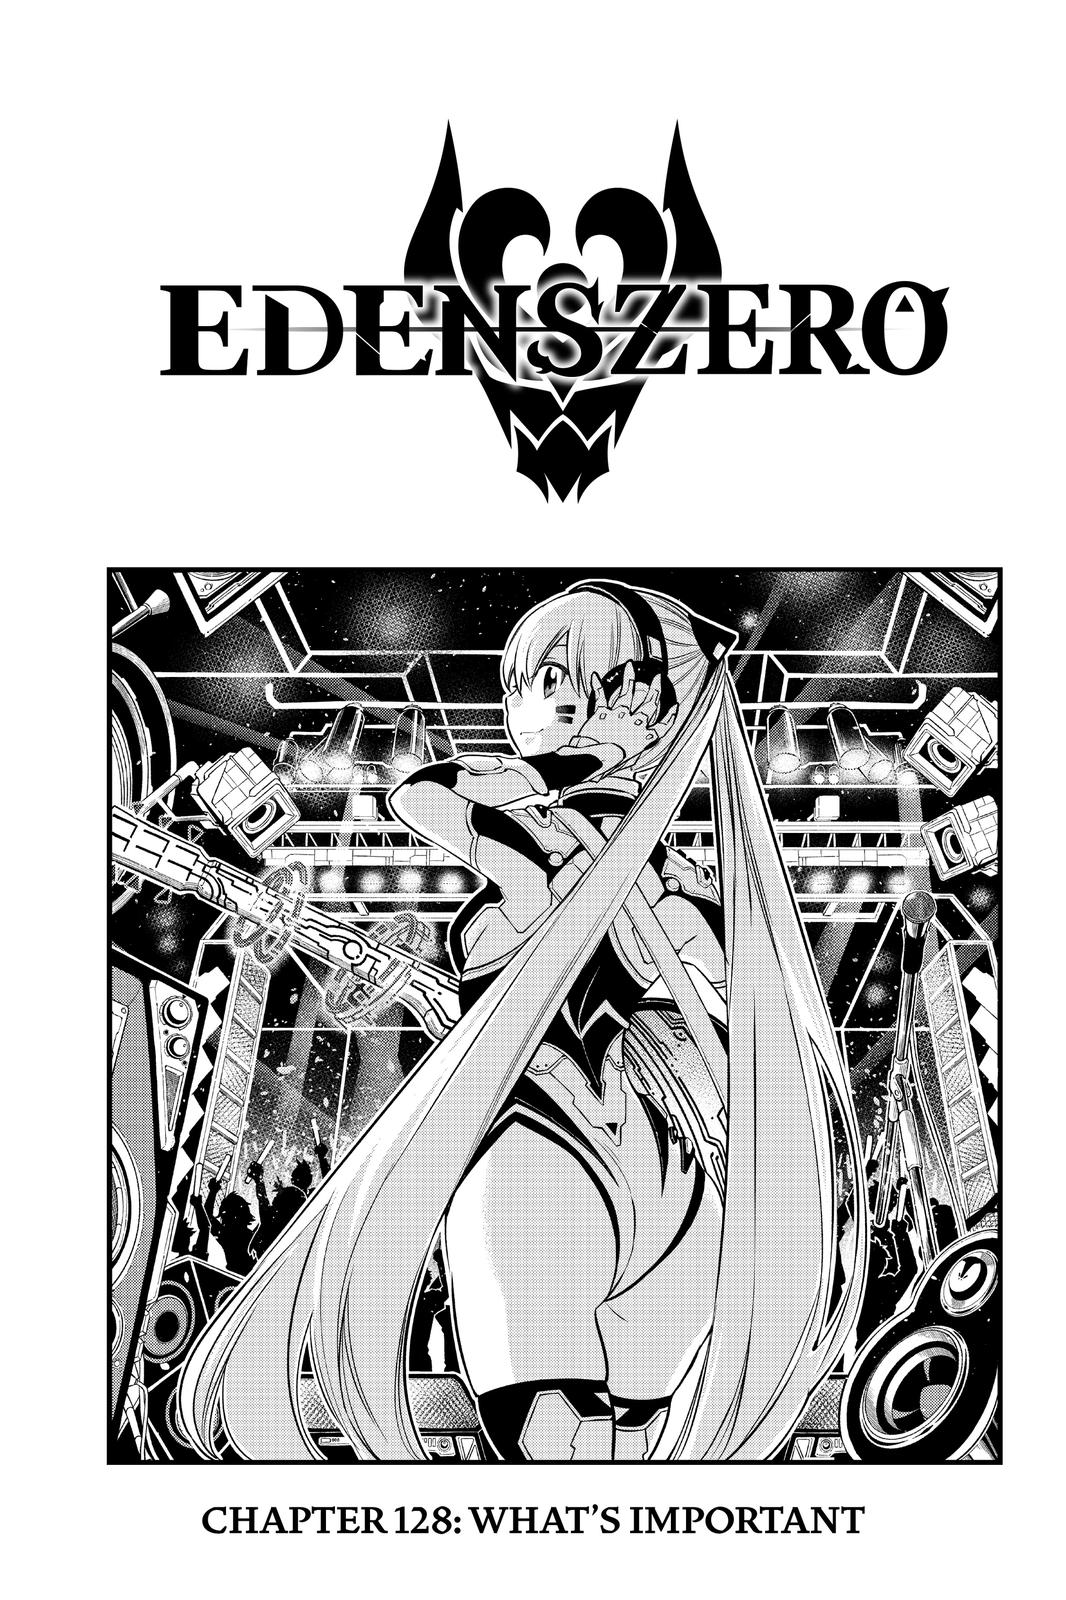 edens zero anime, edens zero game, edens zero characters, edens zero release date, edens zero trailer, edens zero wiki, edens zero anime announcement, edens zero anime adaptation release date, edens zero rebecca, shiki granbell, edens zero happy, edens zero 2, edens zero natsu and lucy, edens zero homura, edens zero shiki, edens zero rebecca ether gear, jessie edens zero, edens zero books, is edens zero good, edens zero fairy tail connection, fairy tail: 100 year quest myanimelist, rave master review, edens zero twitter, edens zero reddit, is eden zero connected to fairy tail, is eden zero good, eden zero shiki, elsie crimson, edens zero anime characters, edens zero game release date, rave master, fairy tail, mangadoctr, edens zero, volume 1, edens zero mangahelpers, shiki edens zero, homura edens zero, edens zero, edens zero manga, rebecca edens zero, reddit edens zero, edens zero mangahelper, edens zero manga online, hiro mashima edens zero, edens zero review, edens zero 11, xiaomei edens zero, hiro mashima edens zero 1, edens zero 65, edens zero volume 1, edens zero volume 8, edens zero vol 6, edens zero 2 hiro mashima, edens zero amazon, edens zero hiro mashima, edens zero volume, edens zero manga free, edens zero volume 10, edens zero vol 7, edens zero crunchyroll, edens zero manga 1, edens zero volume 11, manga eden's zero, edens 0, edens zero volume 5, edens zero volume 2, edens zero mangareader, nino edens zero, edens zero 12, figurine edens zero, edens one edens zero, rebecca edens, edens zero volume 4, crunchyroll edens zero, edens zero panini, edens zero 60, edens zero vol 12, read edens zero, edens zero read, edens zero 106, edens zero read online, fairy tail edens zero, edens zero 84, edens zero 98, edens zero 85, edens zero 91, read edens zero online, edens zero 86, manga edens zero, edens zero manga read, edens zero 75, edens zero 113, eden zero mangahelper, read edens zero manga, eden zero fairy tail, edens zero manga read online, read eden zero manga, fairy tail edens zero manga, edens zero manga english, edens zero read online free, read edens zero manga online, edens zero online read, edens zero manga volumes, mangakakalot eden zero, edens zero manga 82, eden 0 manga, edens zero manga 69, edens zero manga 81,Edens Zero,Eden's Zero,Edens Zero manga,Edens Zero anime,manga,Eden's Zero manga,Eden's Zero anime,read Edens Zero,read Edens Zero,chapter,chapters,webcomic